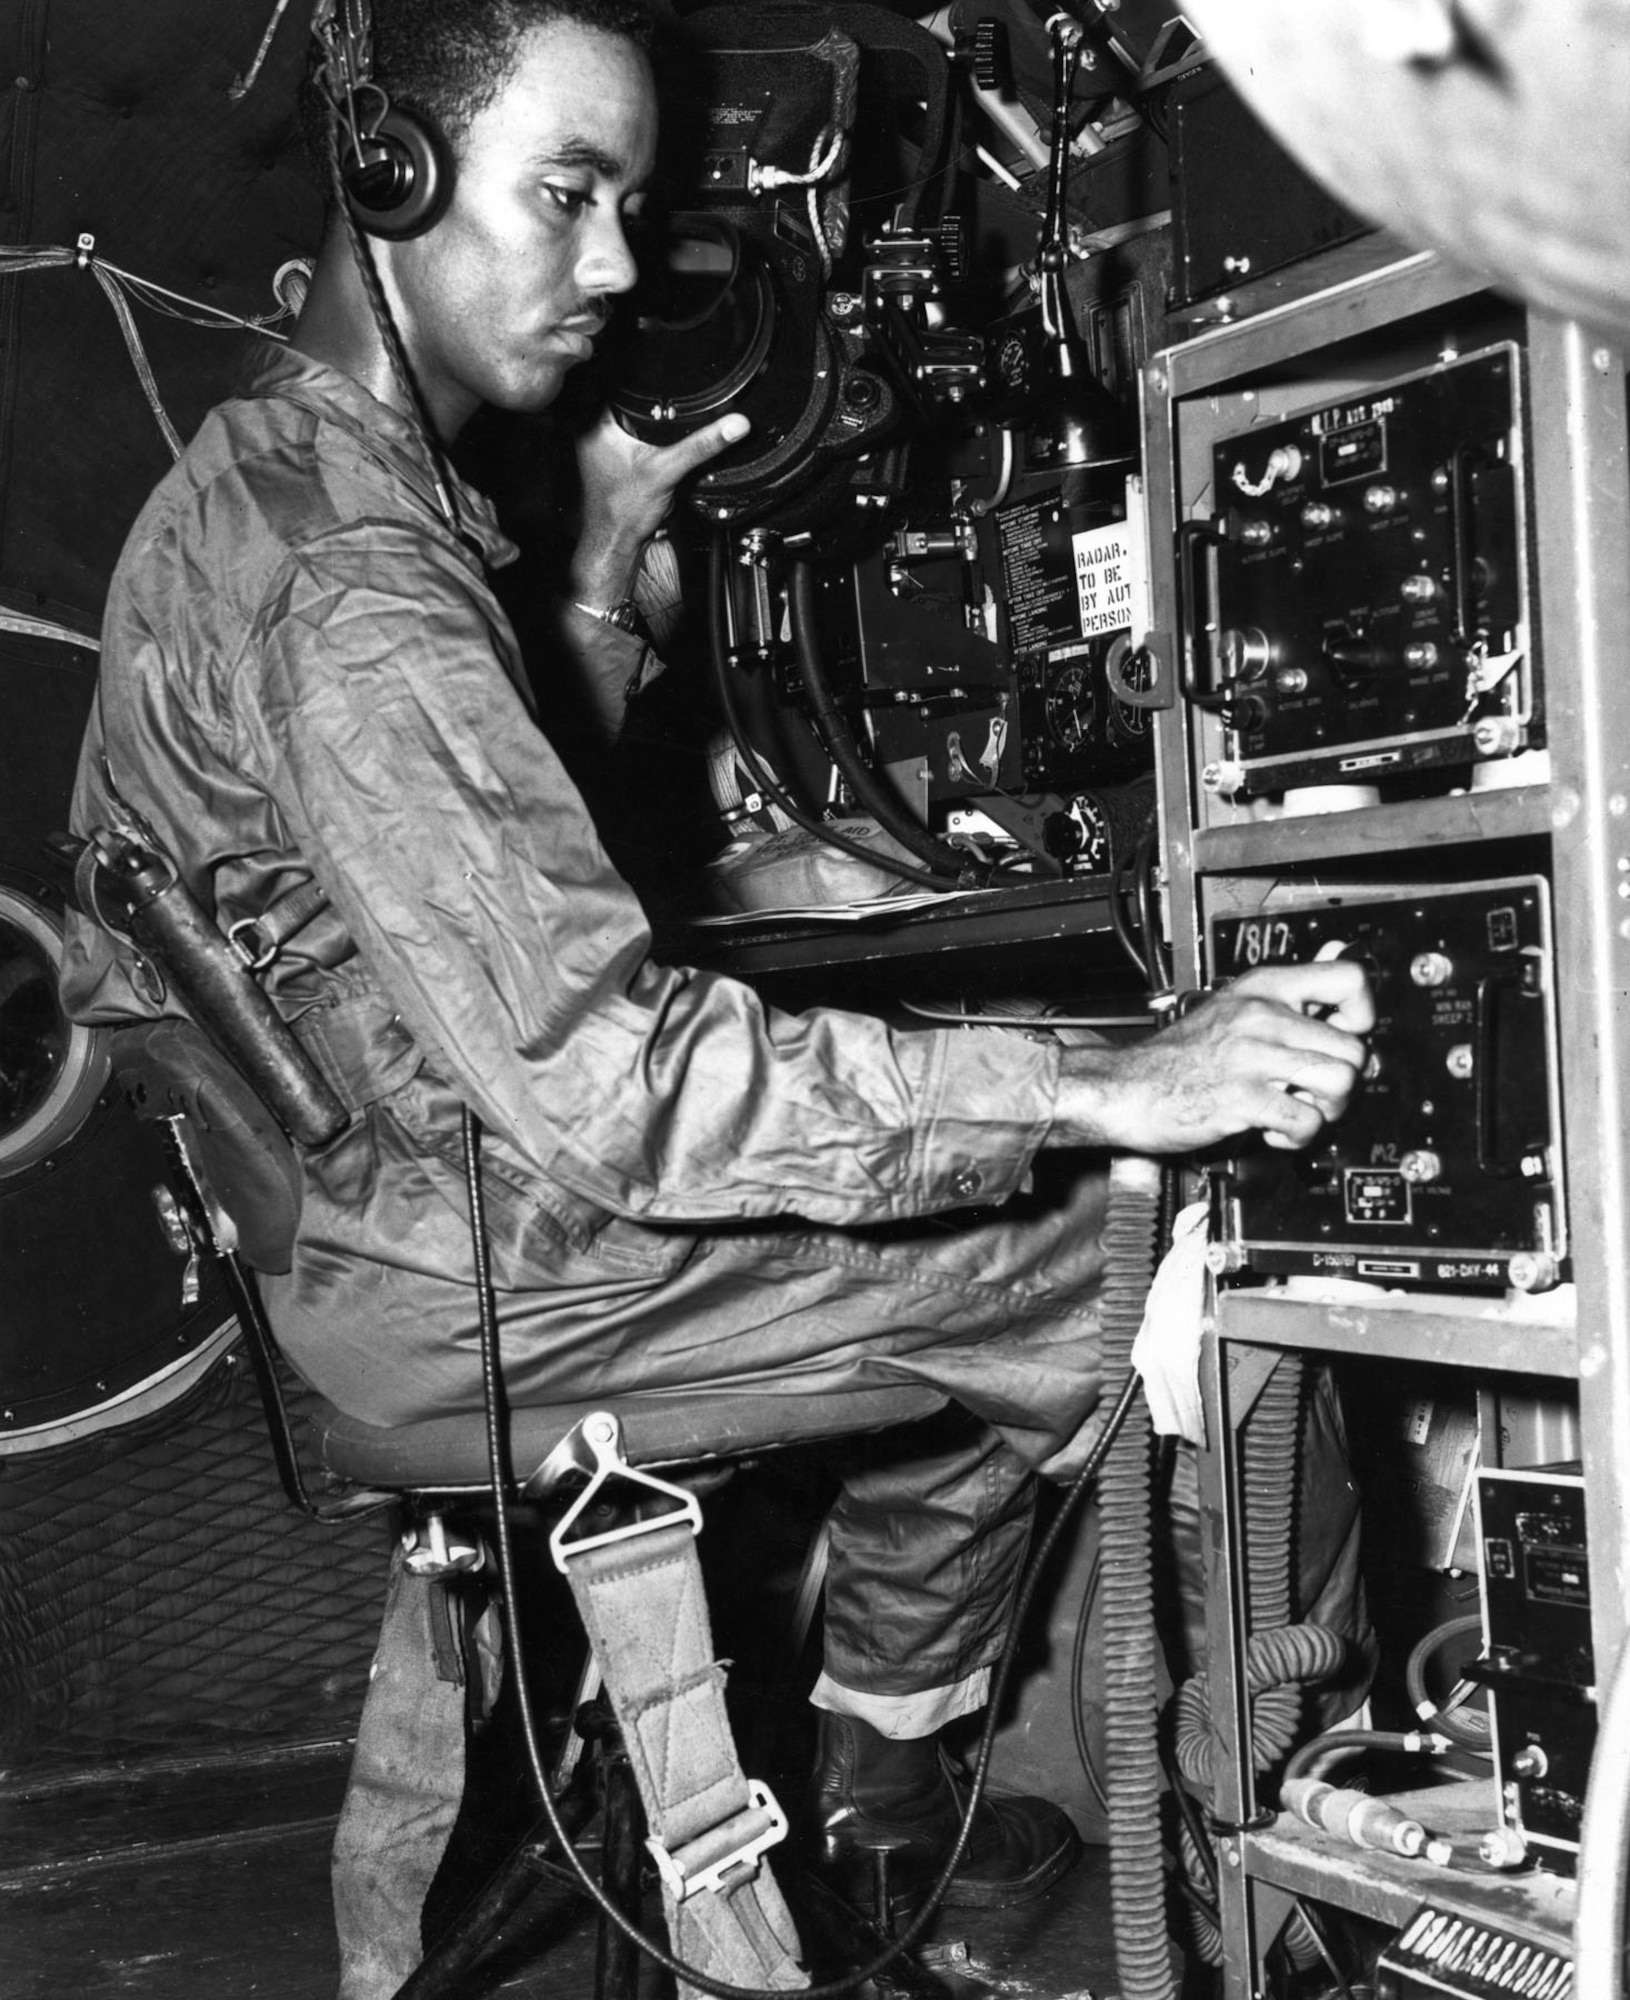 Superfortress radar observer with a pistol strapped to his side in case of bail out over enemy territory. (U.S. Air Force photo)